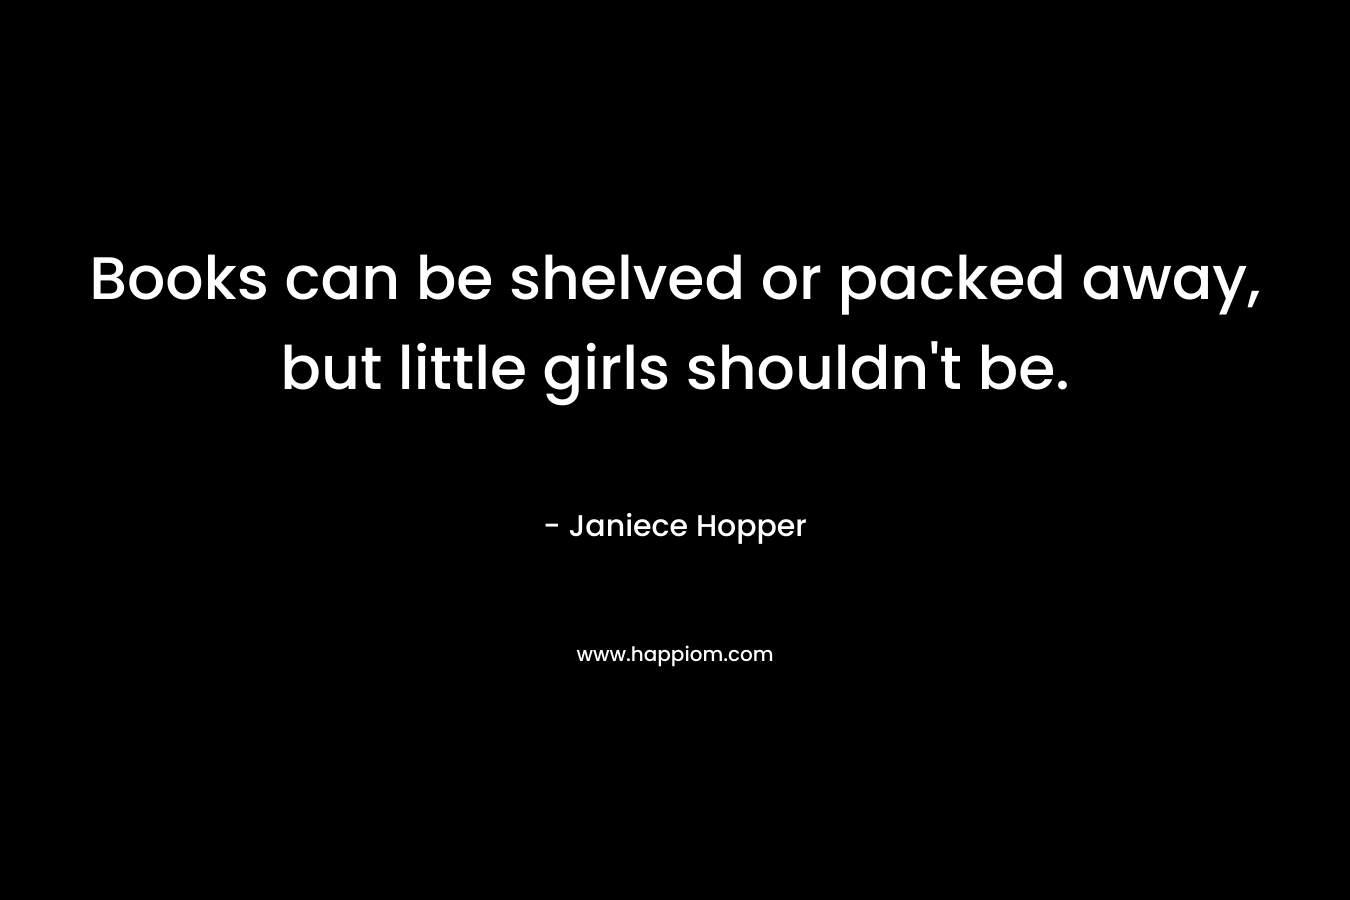 Books can be shelved or packed away, but little girls shouldn't be.